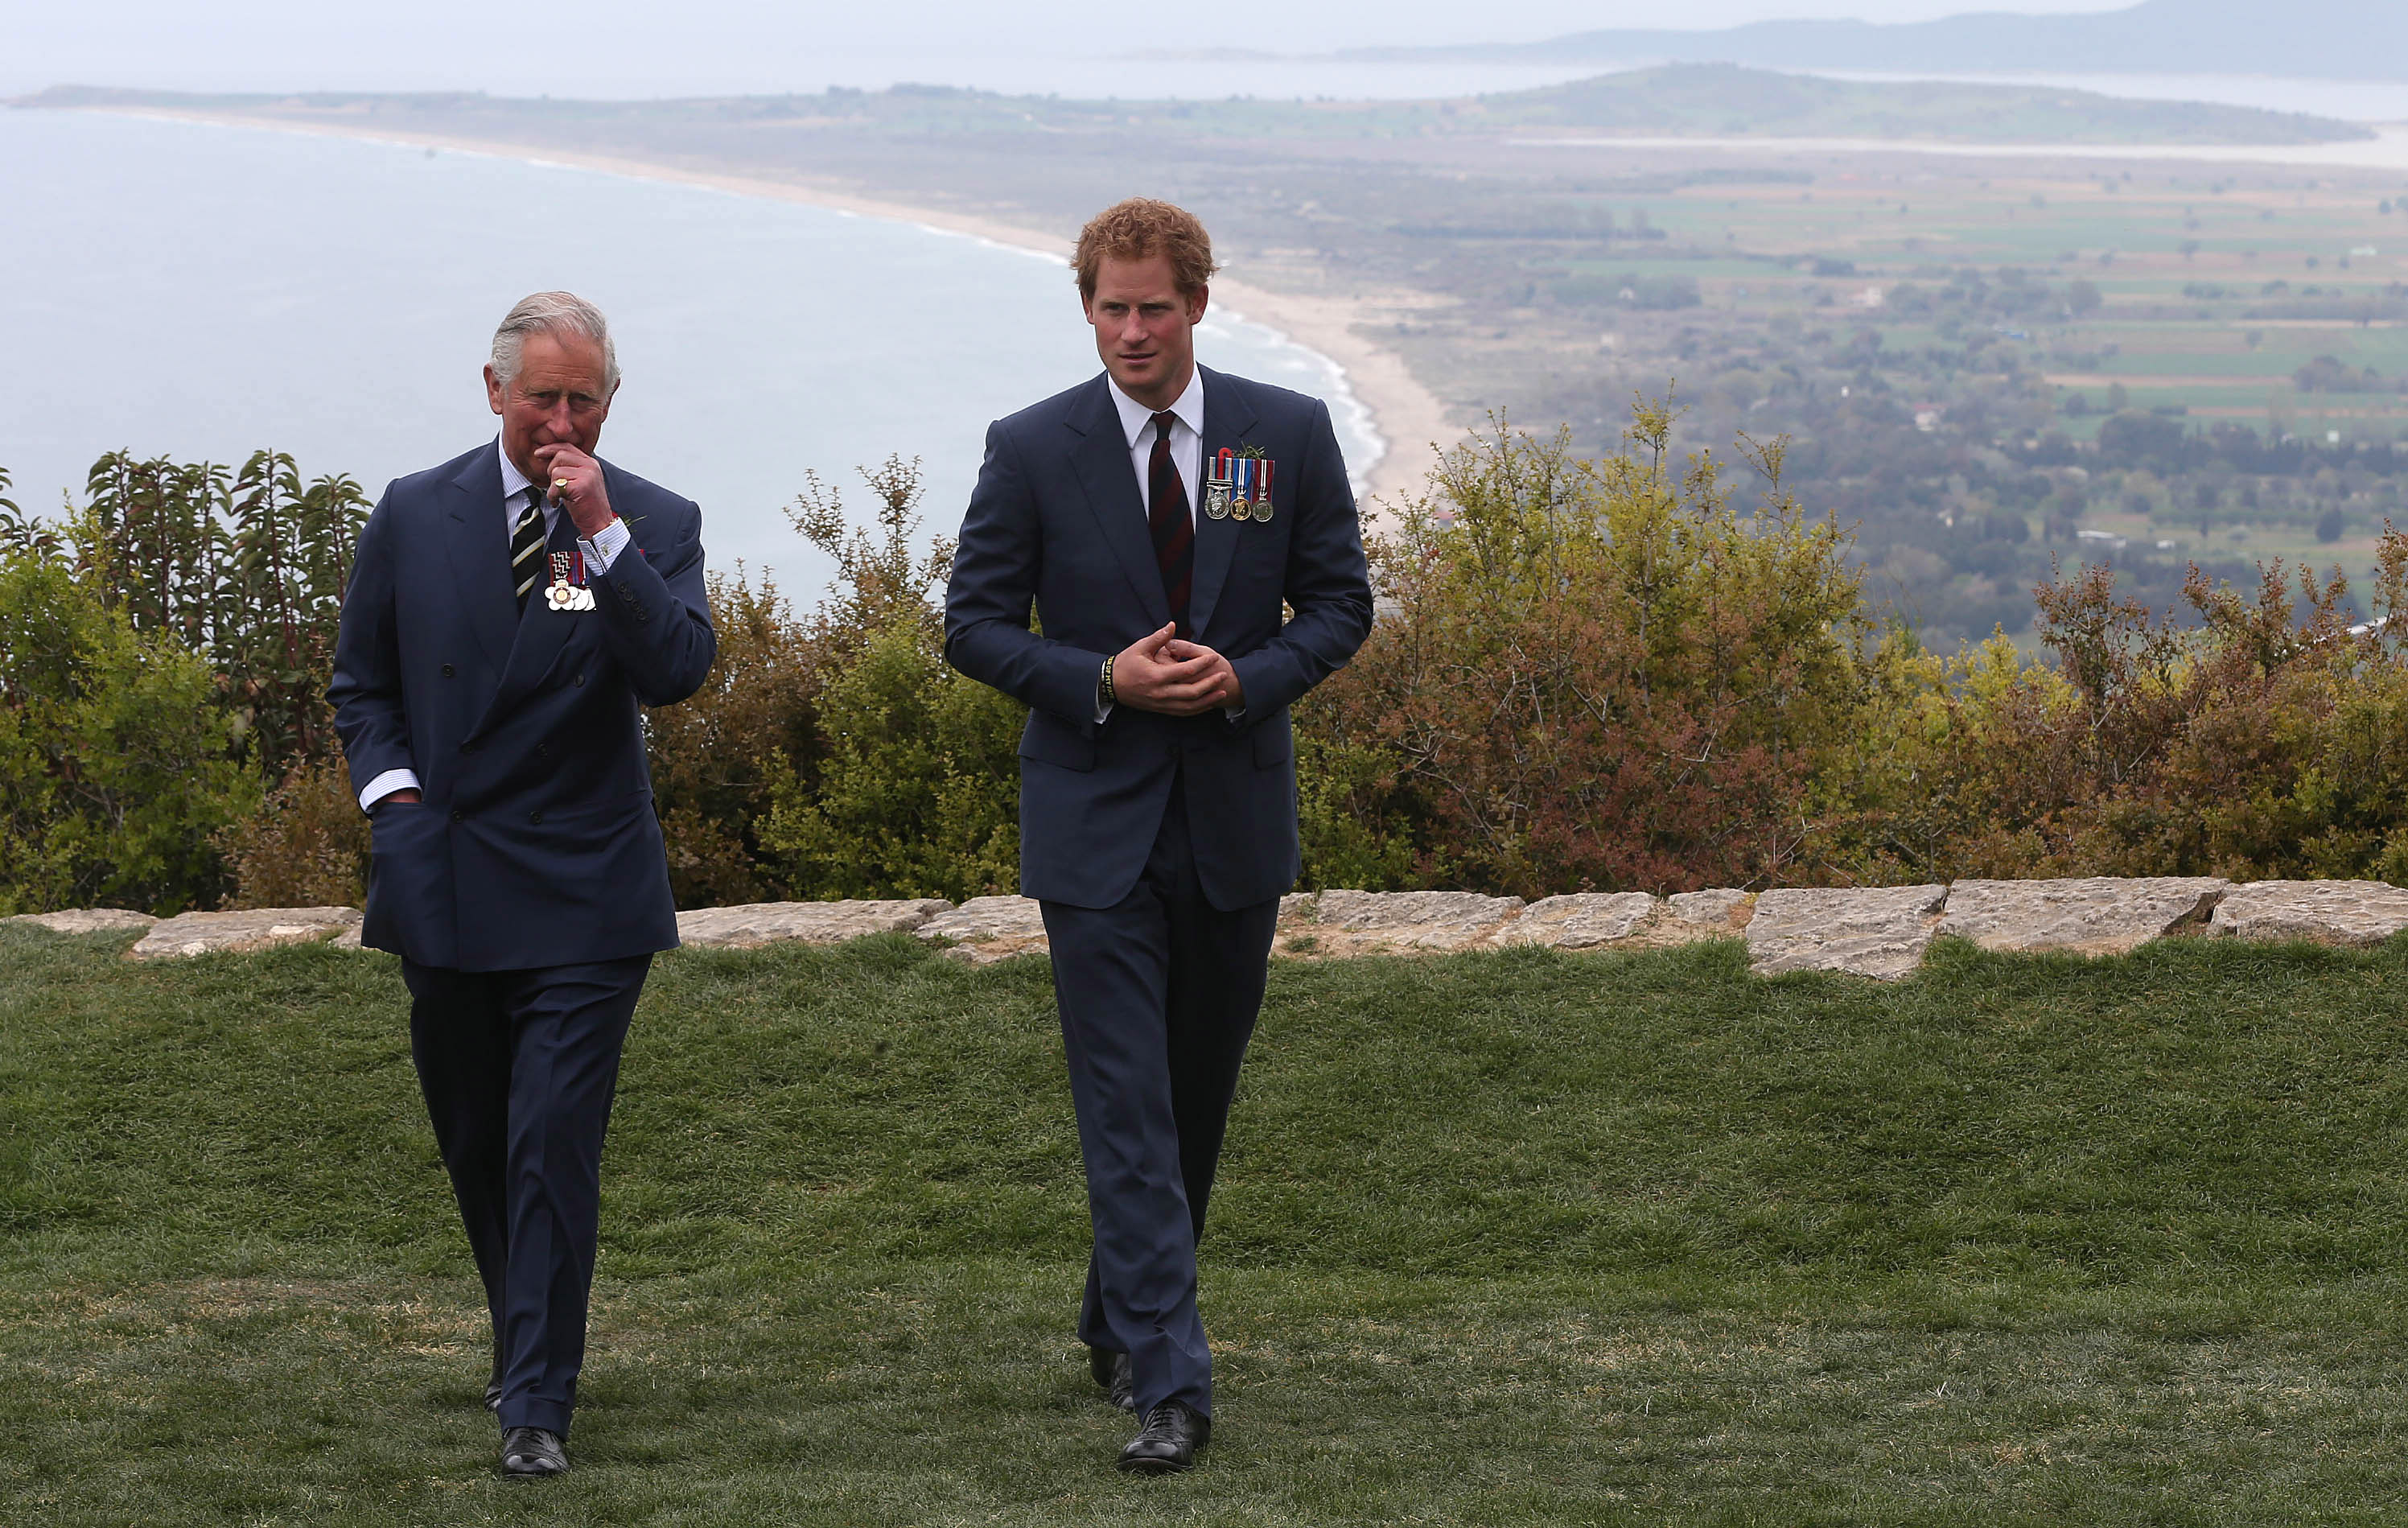 King Charles III and Prince Harry chatting during the 100th anniversary of the Battle of Gallipoli event in Gallipoli, Turkey on April 25, 2015 | Source: Getty Images